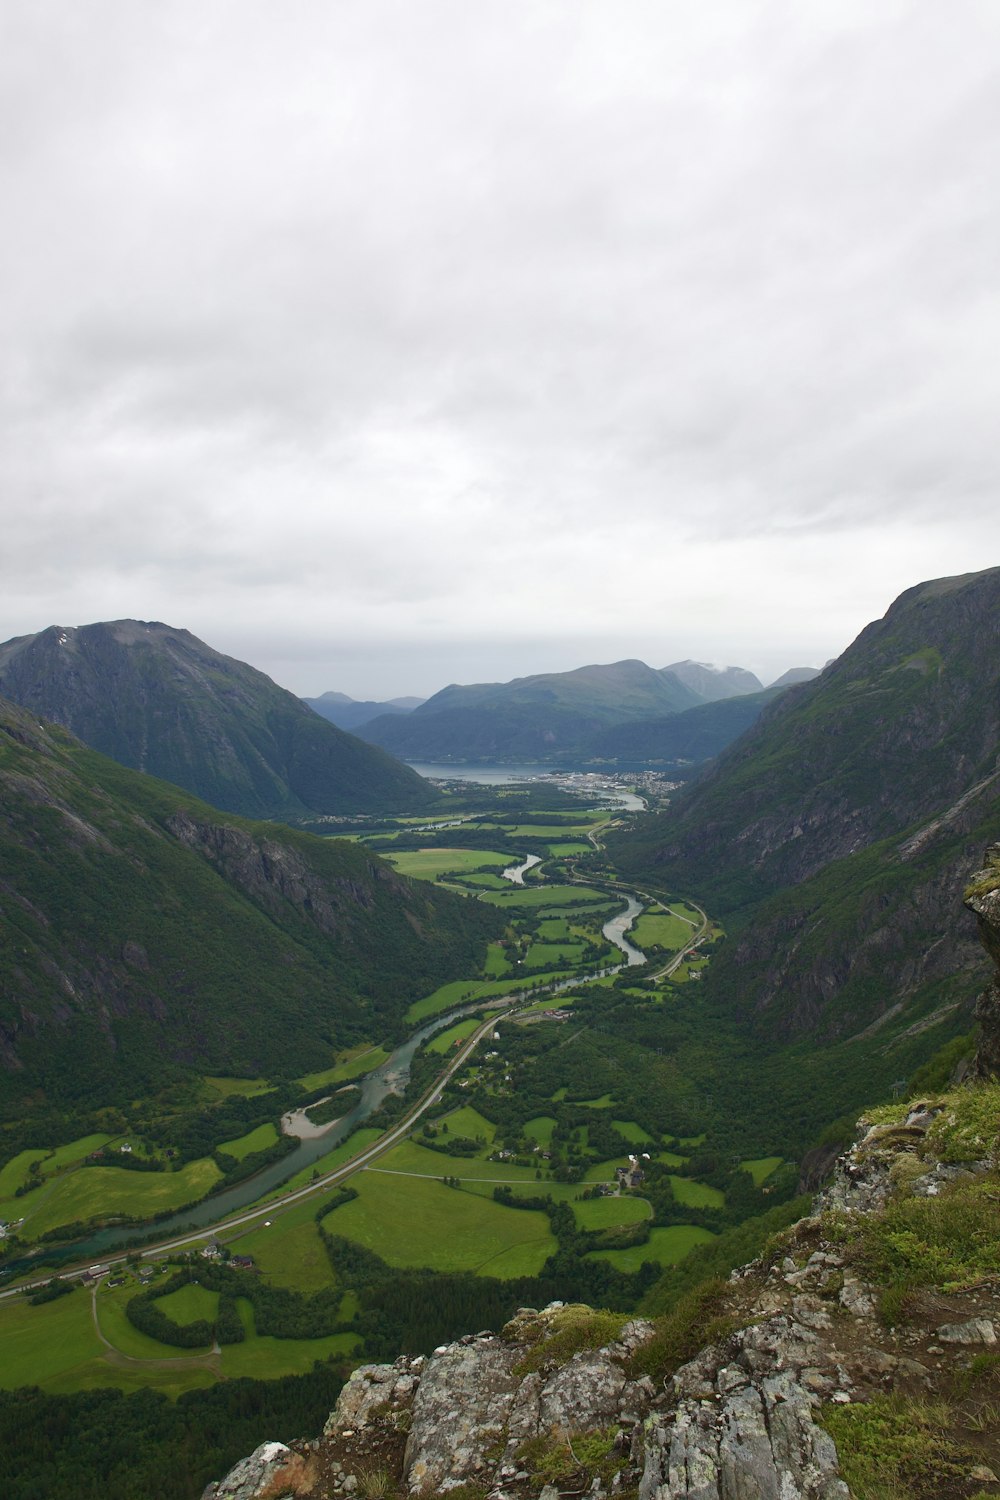 a view of a valley with a river running through it